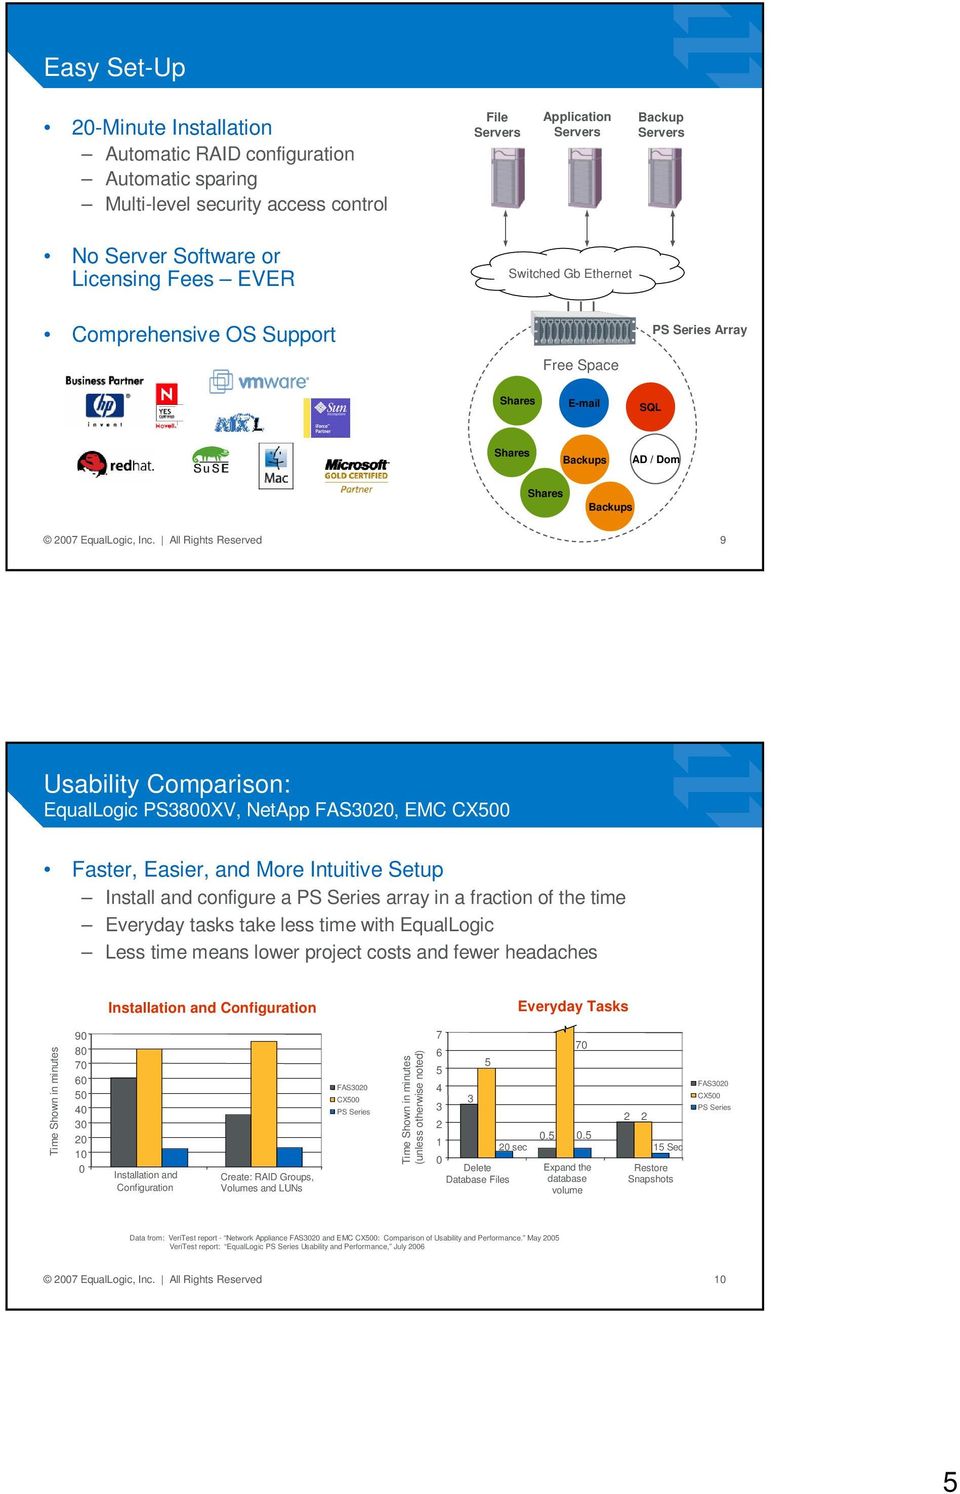 All Rights Reserved 9 Usability Comparison: EqualLogic PS3800XV, NetApp FAS300, EMC CX500 Faster, Easier, and More Intuitive Setup Install and configure a PS Series array in a fraction of the time